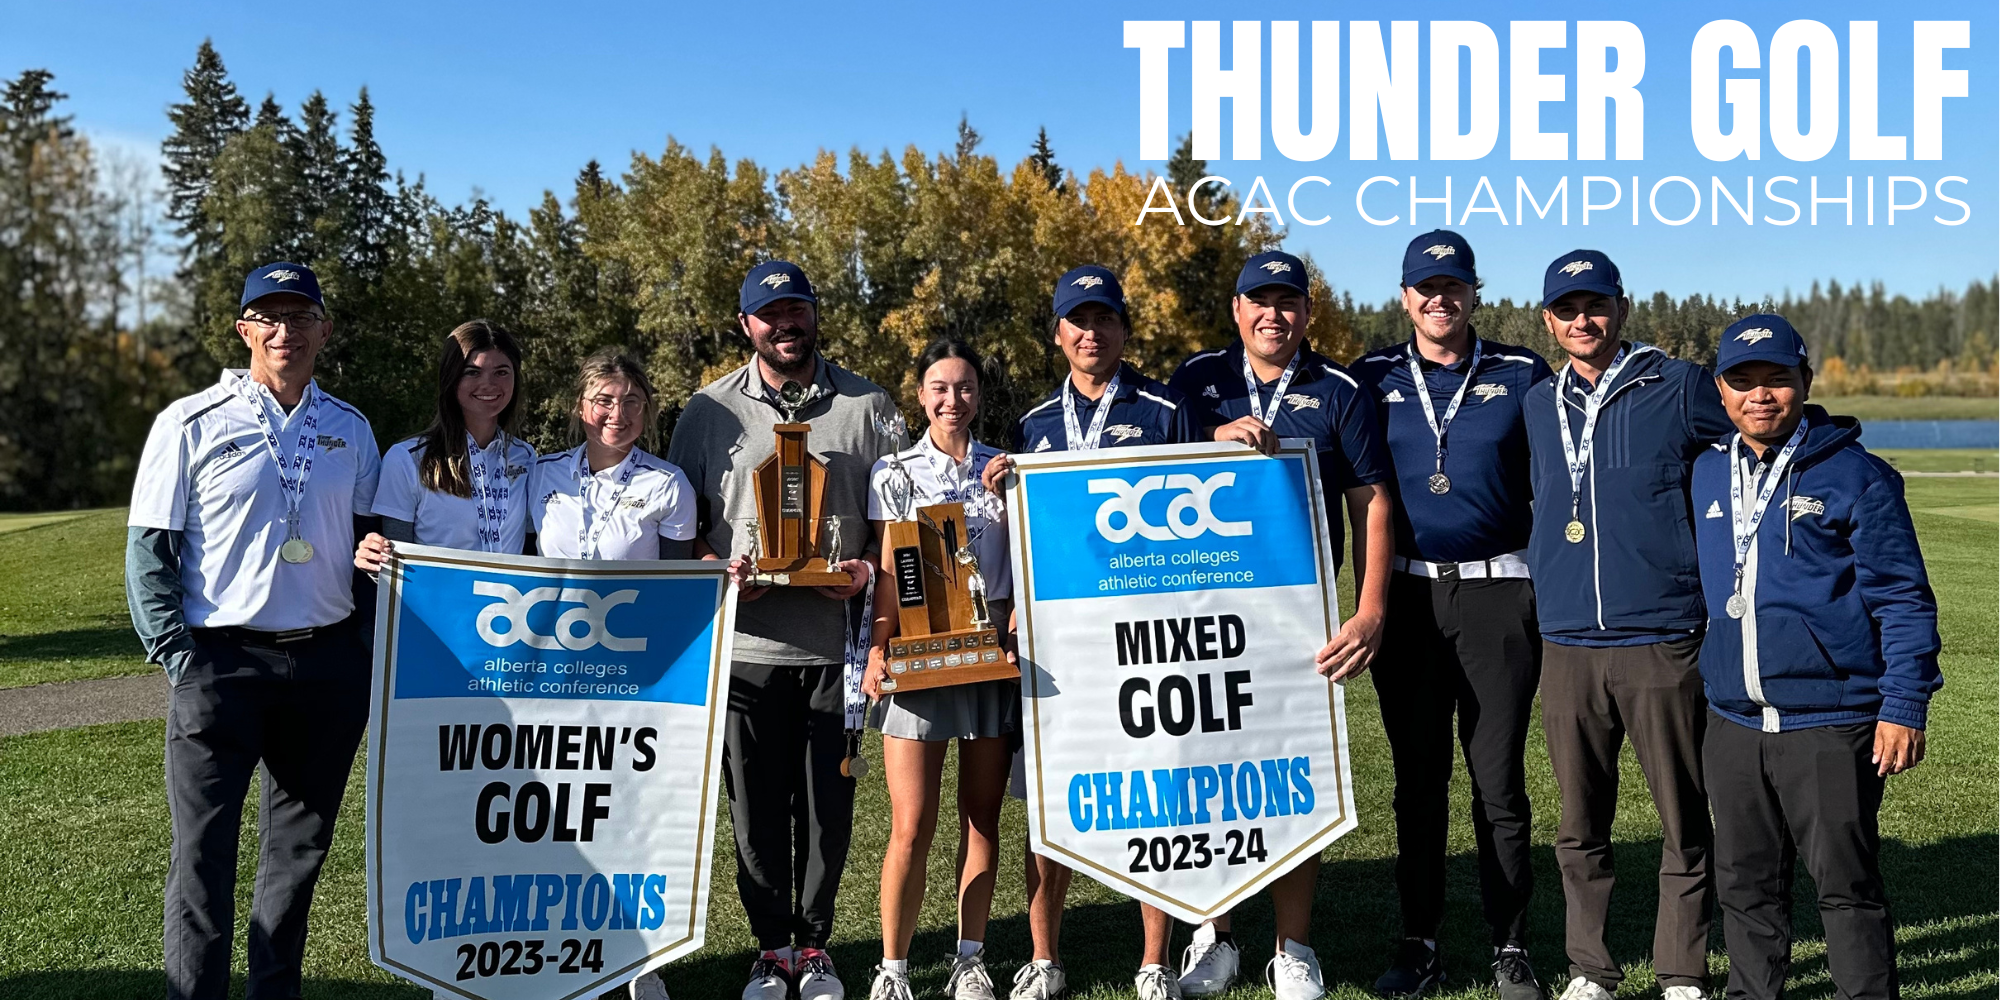 Victory on the Greens: CUE's Success at the 2023 ACAC Golf Championship